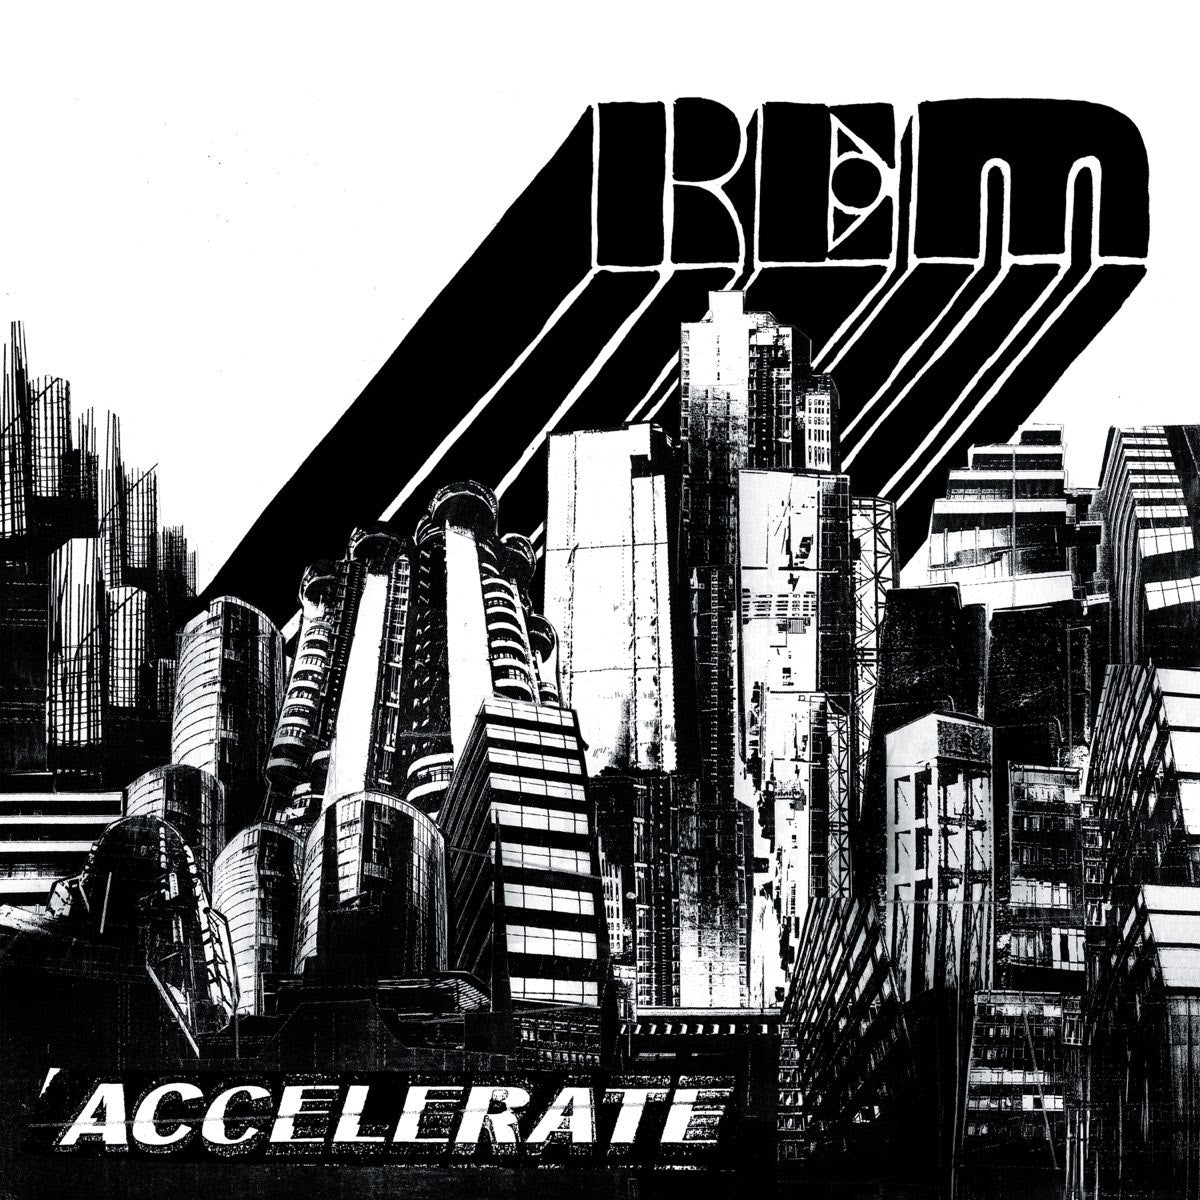 R.E.M. - Accelerate | Buy the Vinyl LP from Flying Nun Records